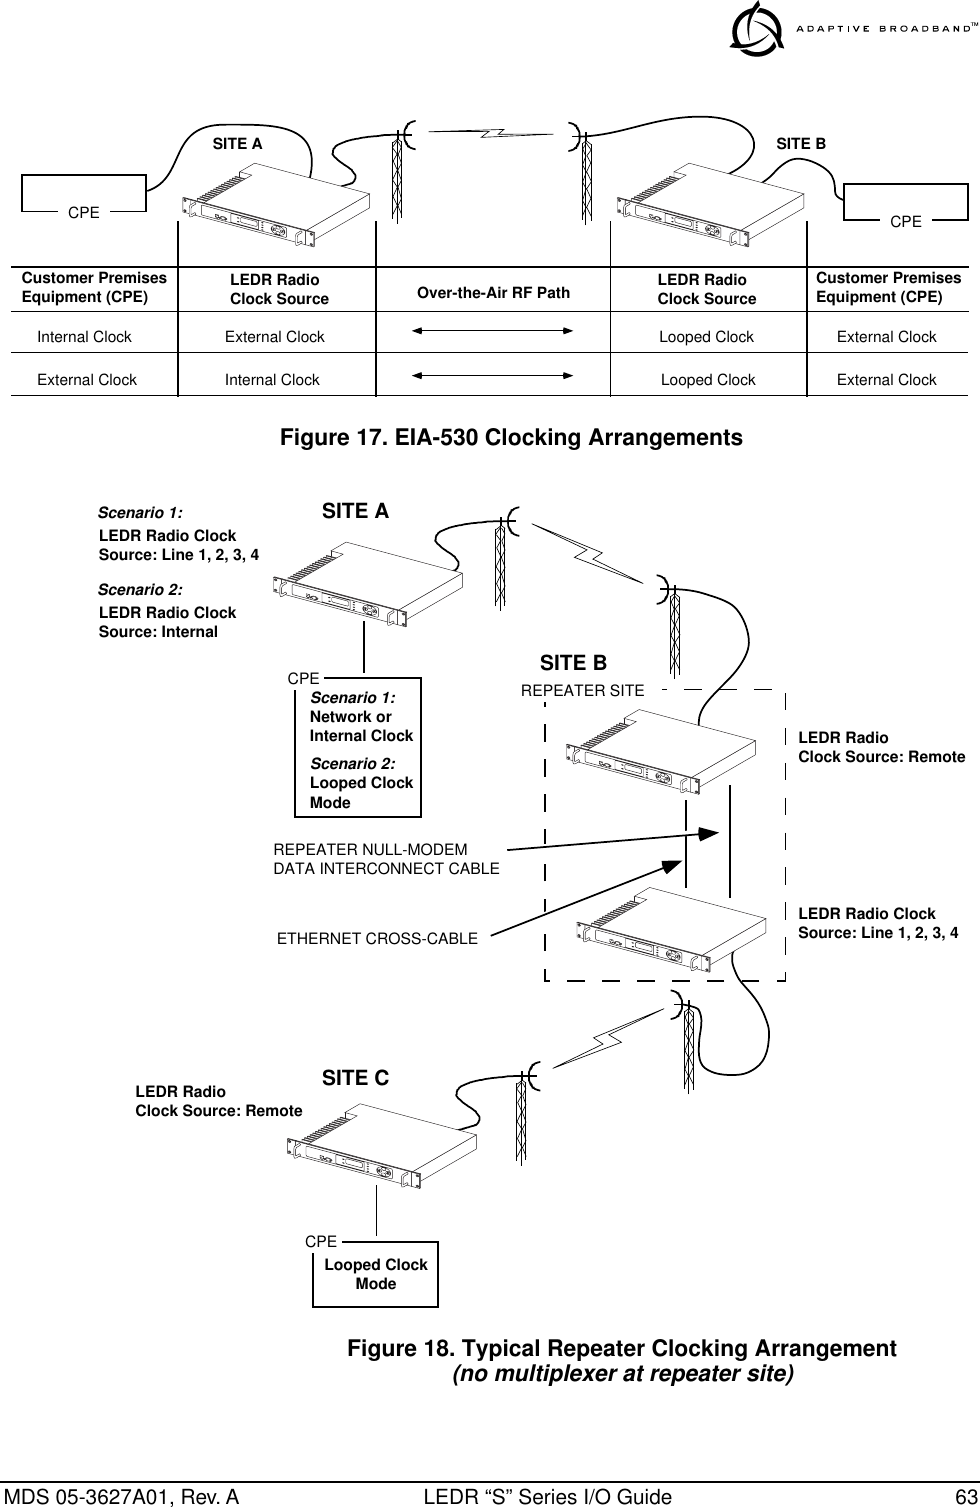 MDS 05-3627A01, Rev. A LEDR “S” Series I/O Guide 63Invisible place holderFigure 17. EIA-530 Clocking ArrangementsInvisible place holderFigure 18. Typical Repeater Clocking Arrangement(no multiplexer at repeater site)Over-the-Air RF PathCPECustomer PremisesEquipment (CPE) LEDR RadioClock SourceCPEInternal Clock External Clock Looped Clock External ClockExternal Clock Internal Clock Looped Clock External ClockCustomer PremisesEquipment (CPE)SITE A SITE BLEDR RadioClock SourceCPEREPEATER NULL-MODEMDATA INTERCONNECT CABLEETHERNET CROSS-CABLEREPEATER SITECPESITE ASITE BSITE CLEDR RadioClock Source: RemoteLEDR Radio ClockSource: Line 1, 2, 3, 4LEDR RadioClock Source: RemoteNetwork orInternal ClockLooped ClockModeScenario 1:LEDR Radio ClockSource: InternalScenario 2:Scenario 1:Scenario 2:Looped ClockModeLEDR Radio ClockSource: Line 1, 2, 3, 4